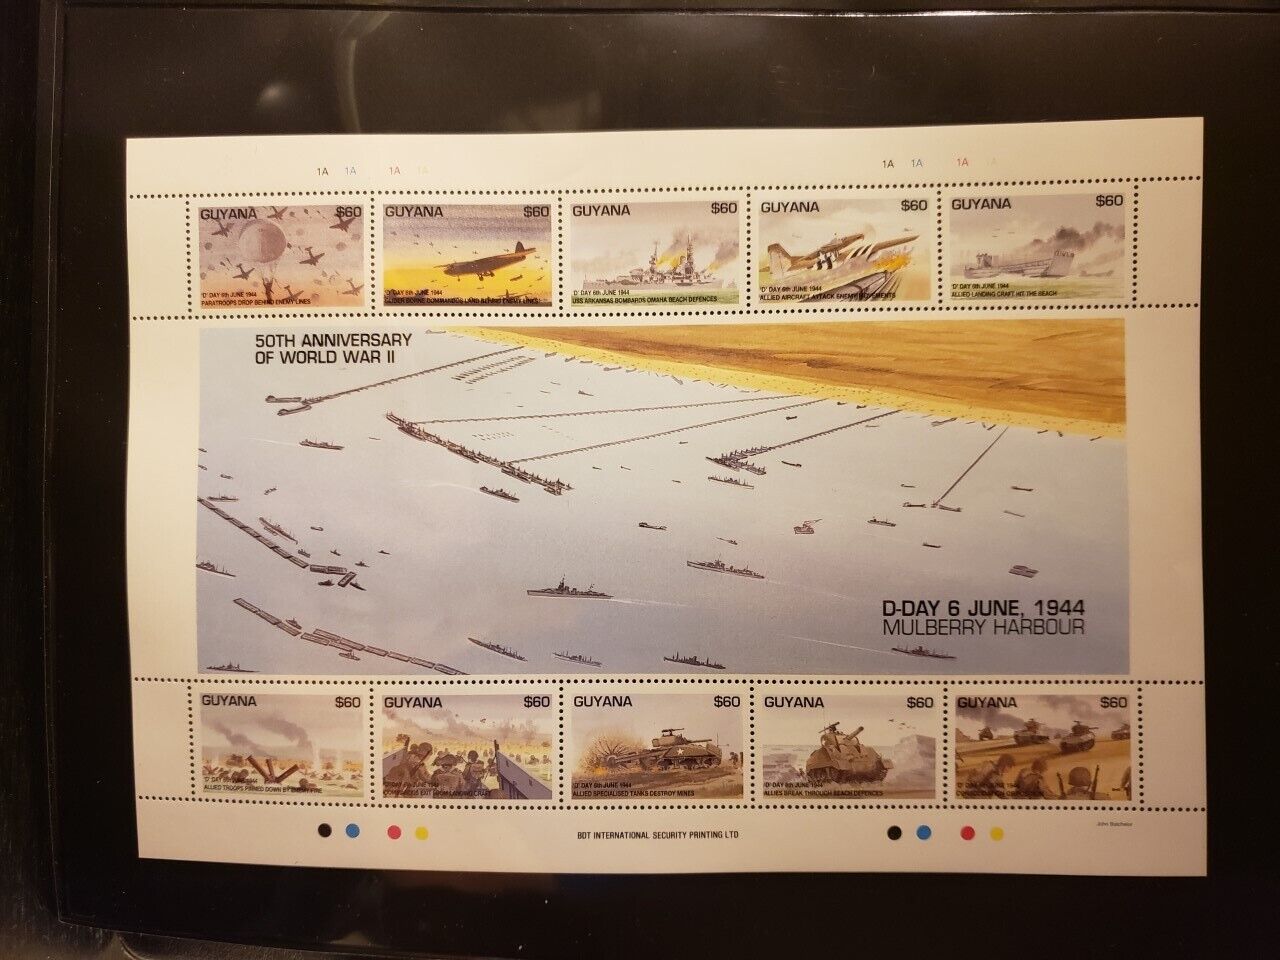 Guyana Aircraft & Aviation Stamps Lot of 8 - MNH - See Details for List Без бренда - фотография #5